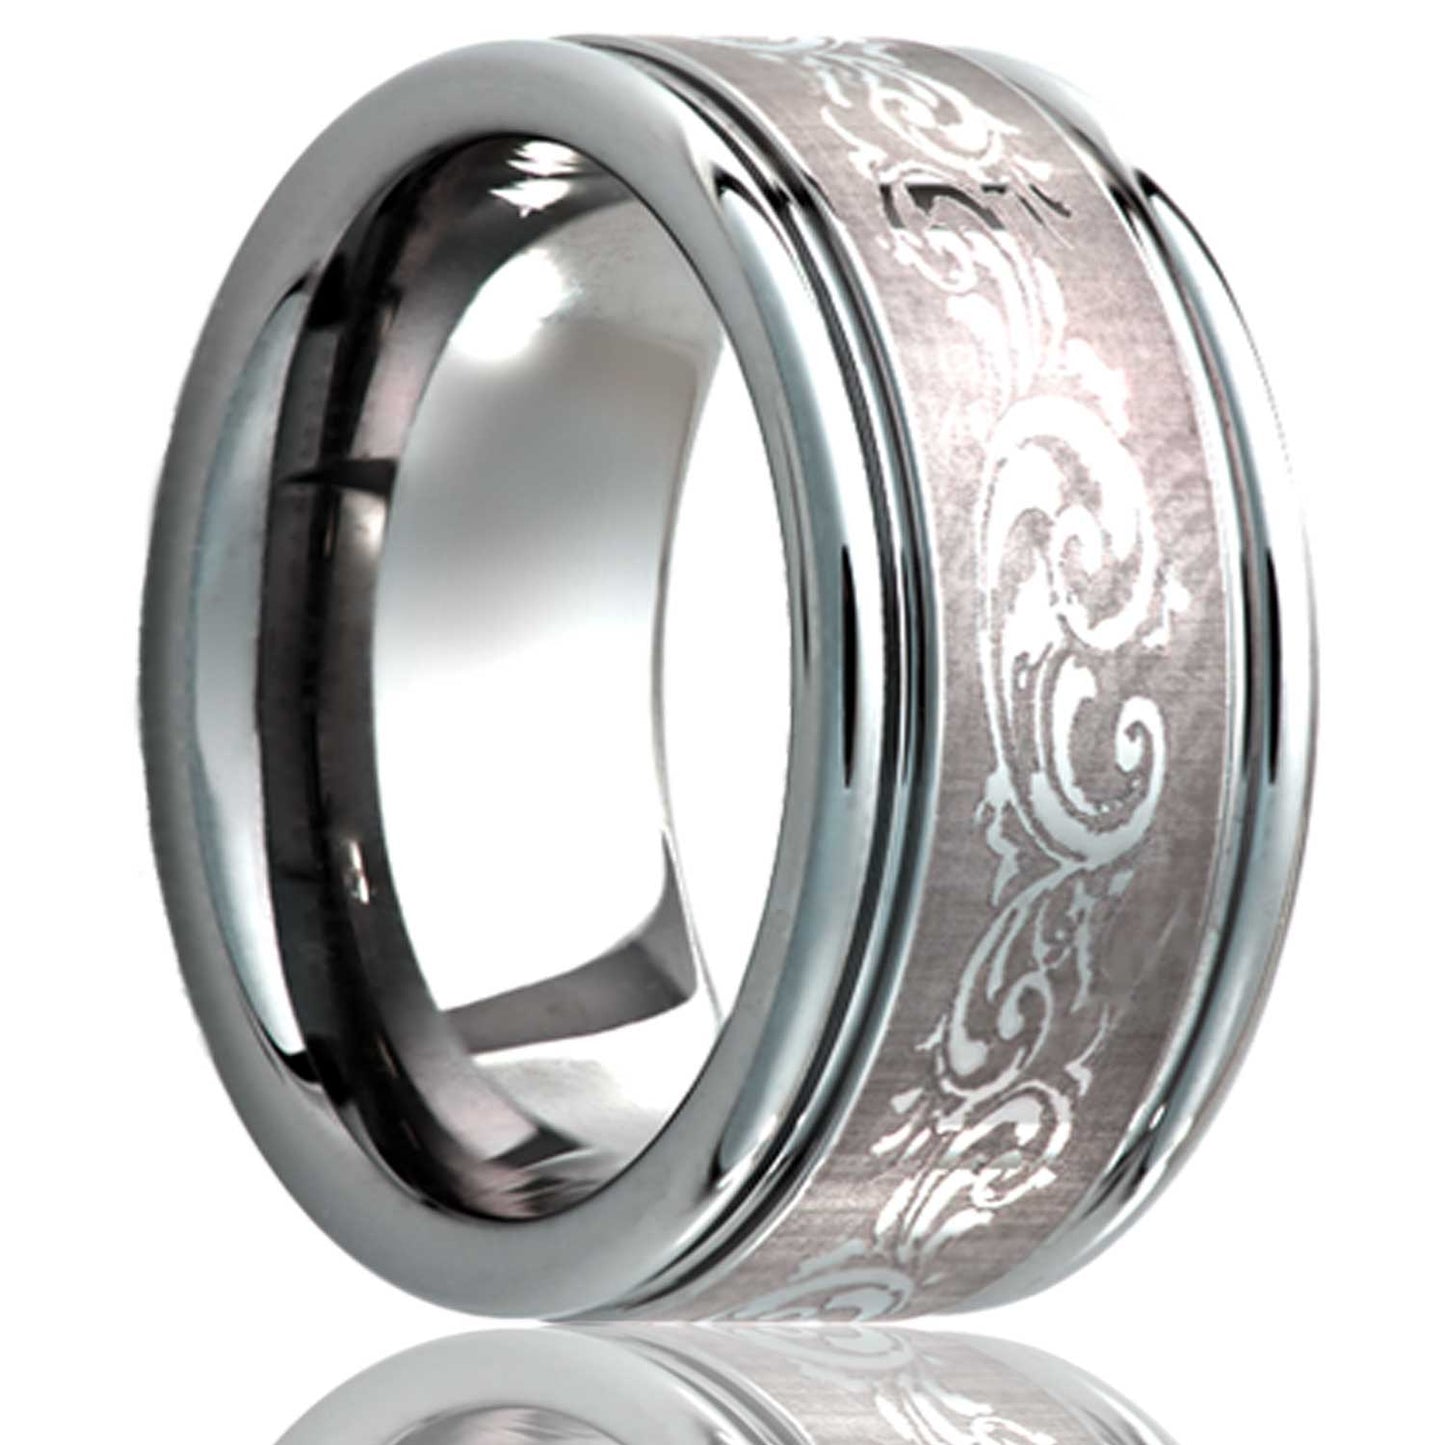 A swirl pattern grooved cobalt wedding band displayed on a neutral white background.